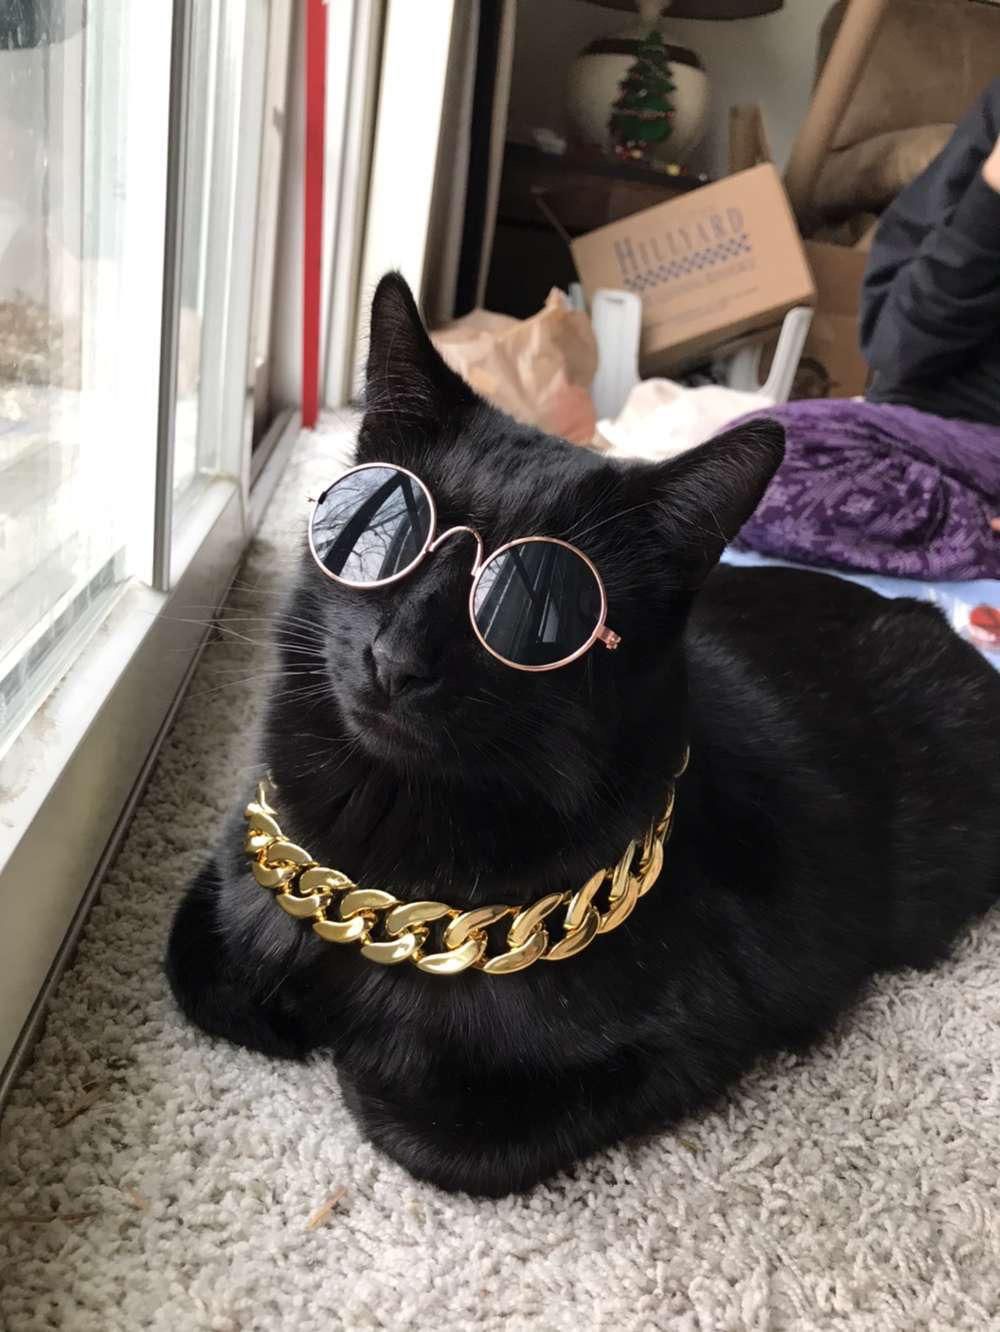 My little sister bought accessories for her cat. This is the result. Thug Lyfe